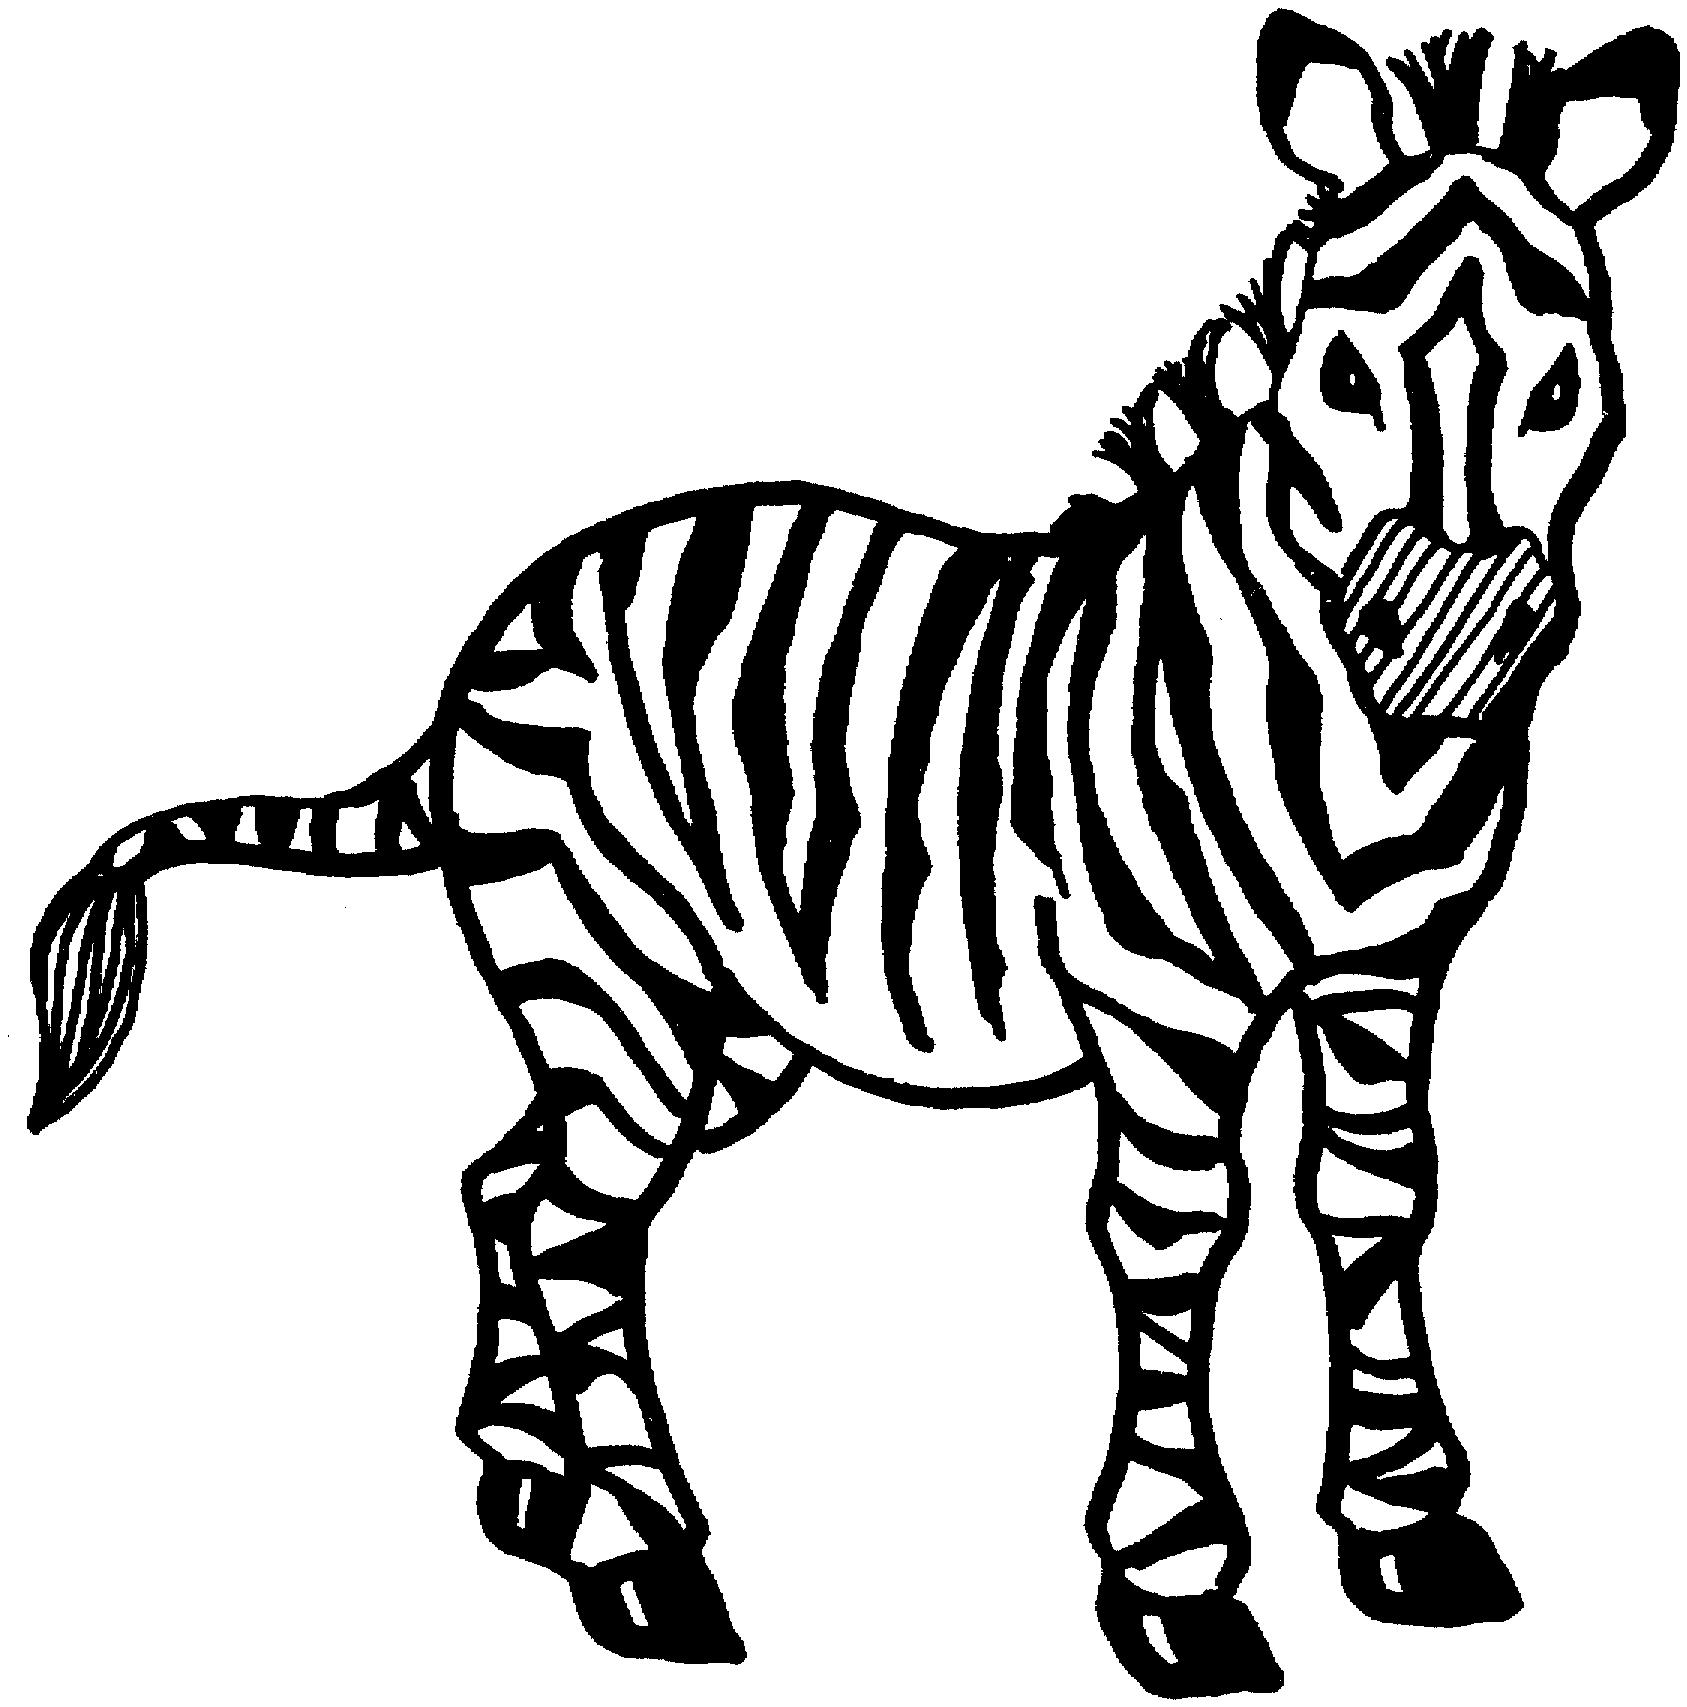 Zebra Coloring Page 2211 Free - ClipArt Best - ClipArt Best